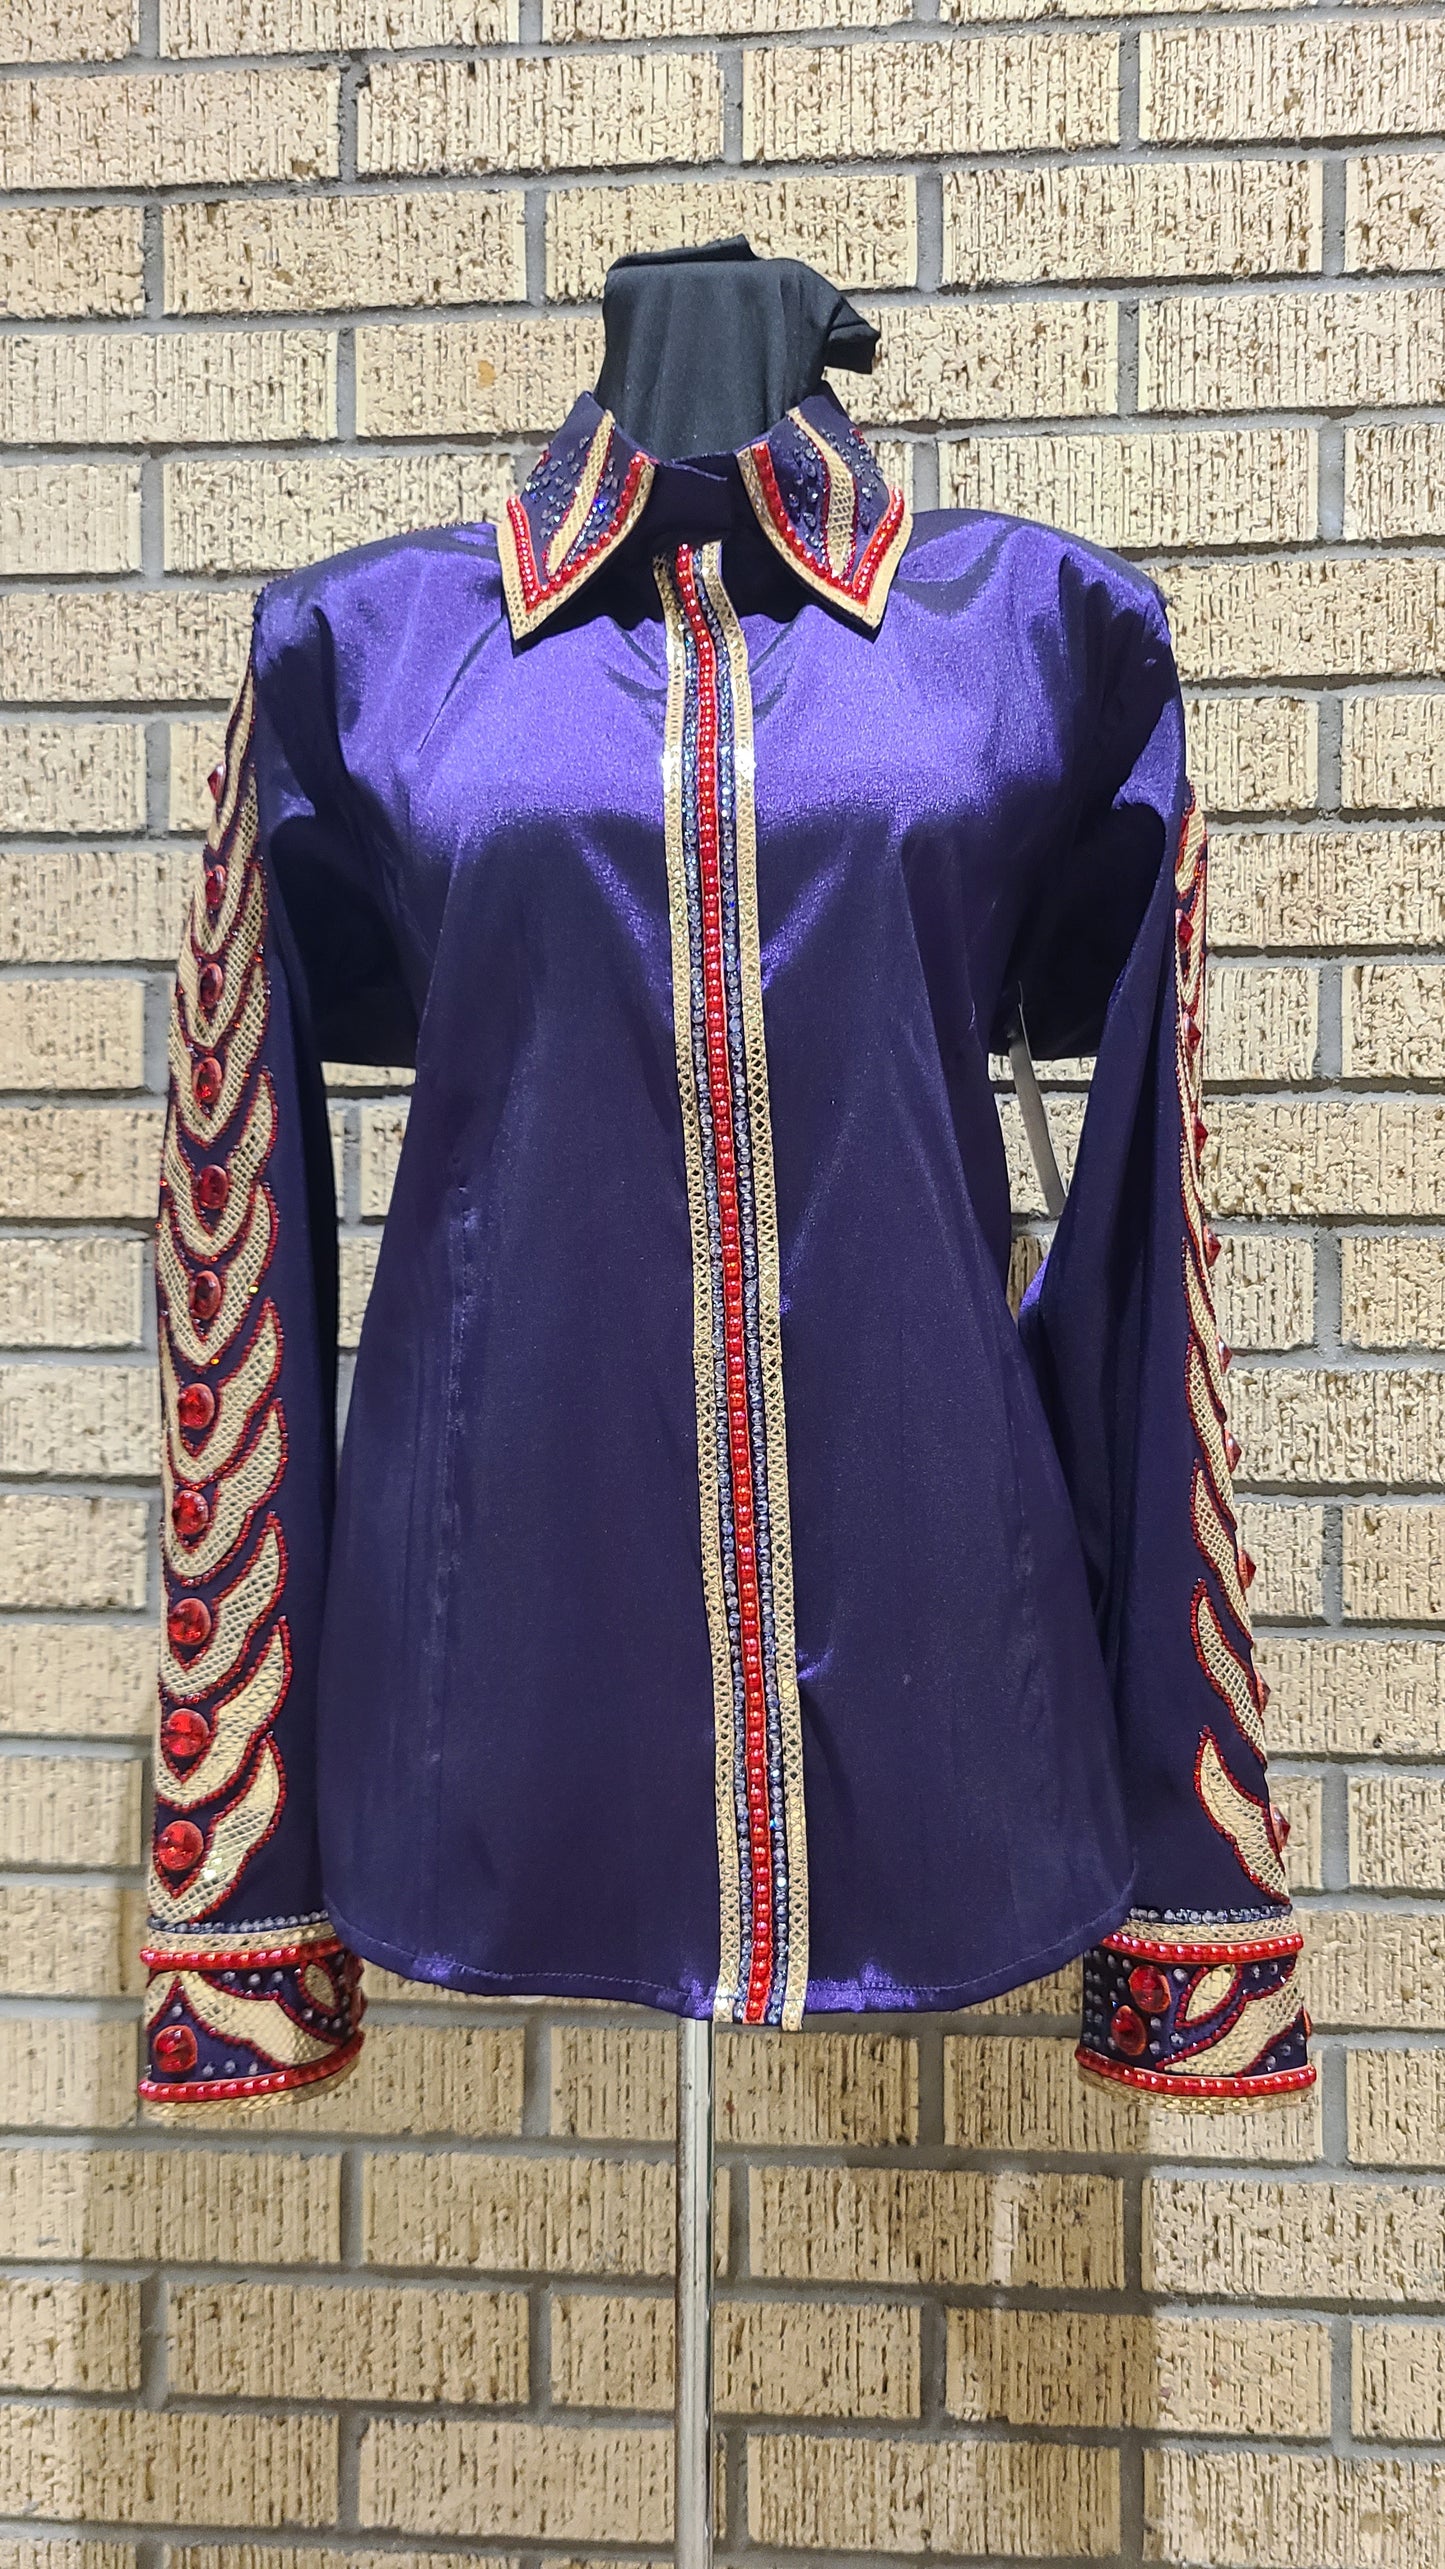 XL Day Shirt purple stretch taffeta with gold and red designs